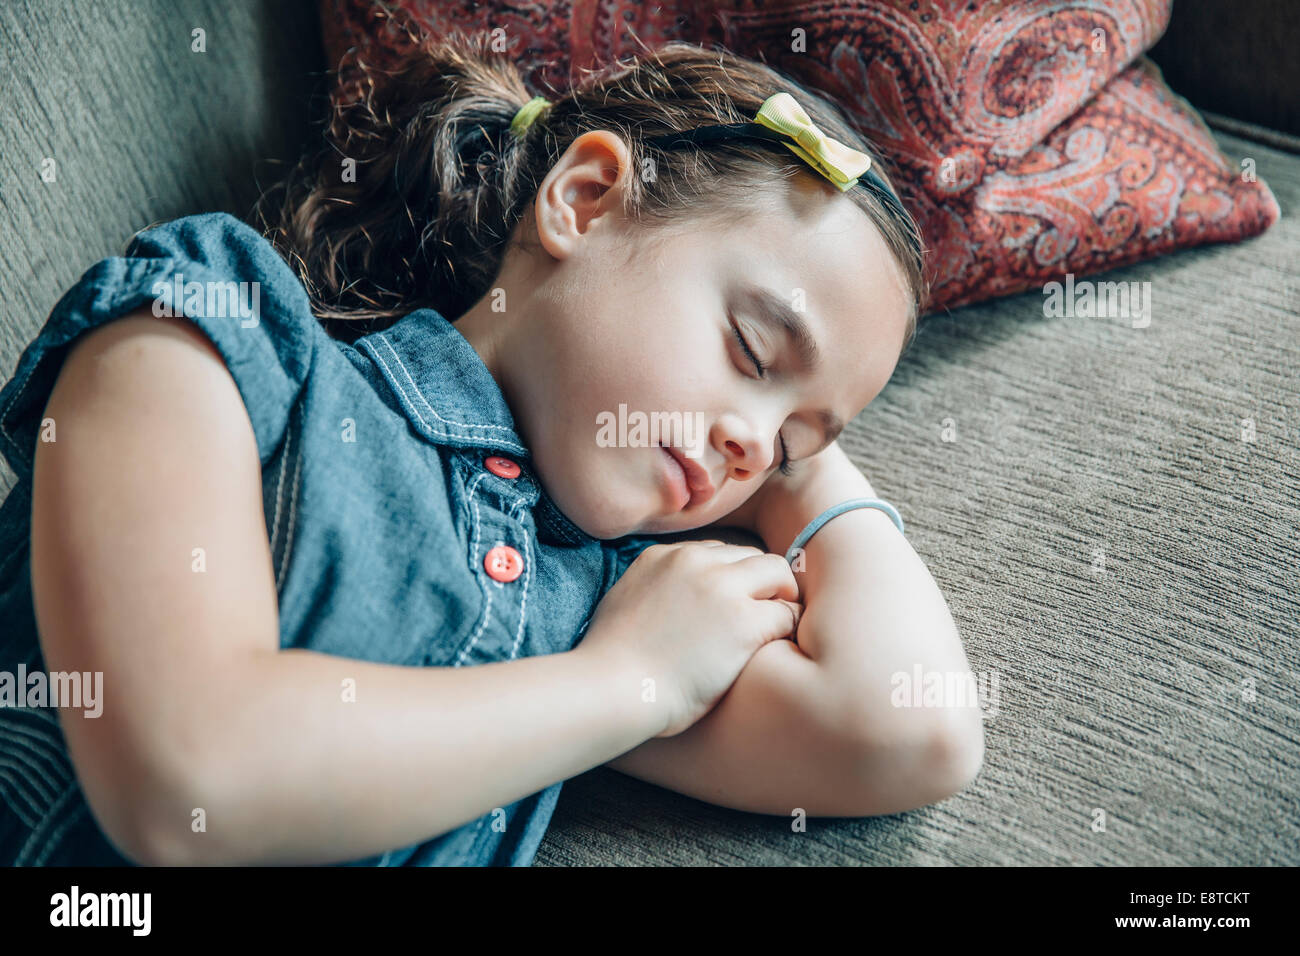 Mixed Race girl sleeping on sofa Banque D'Images